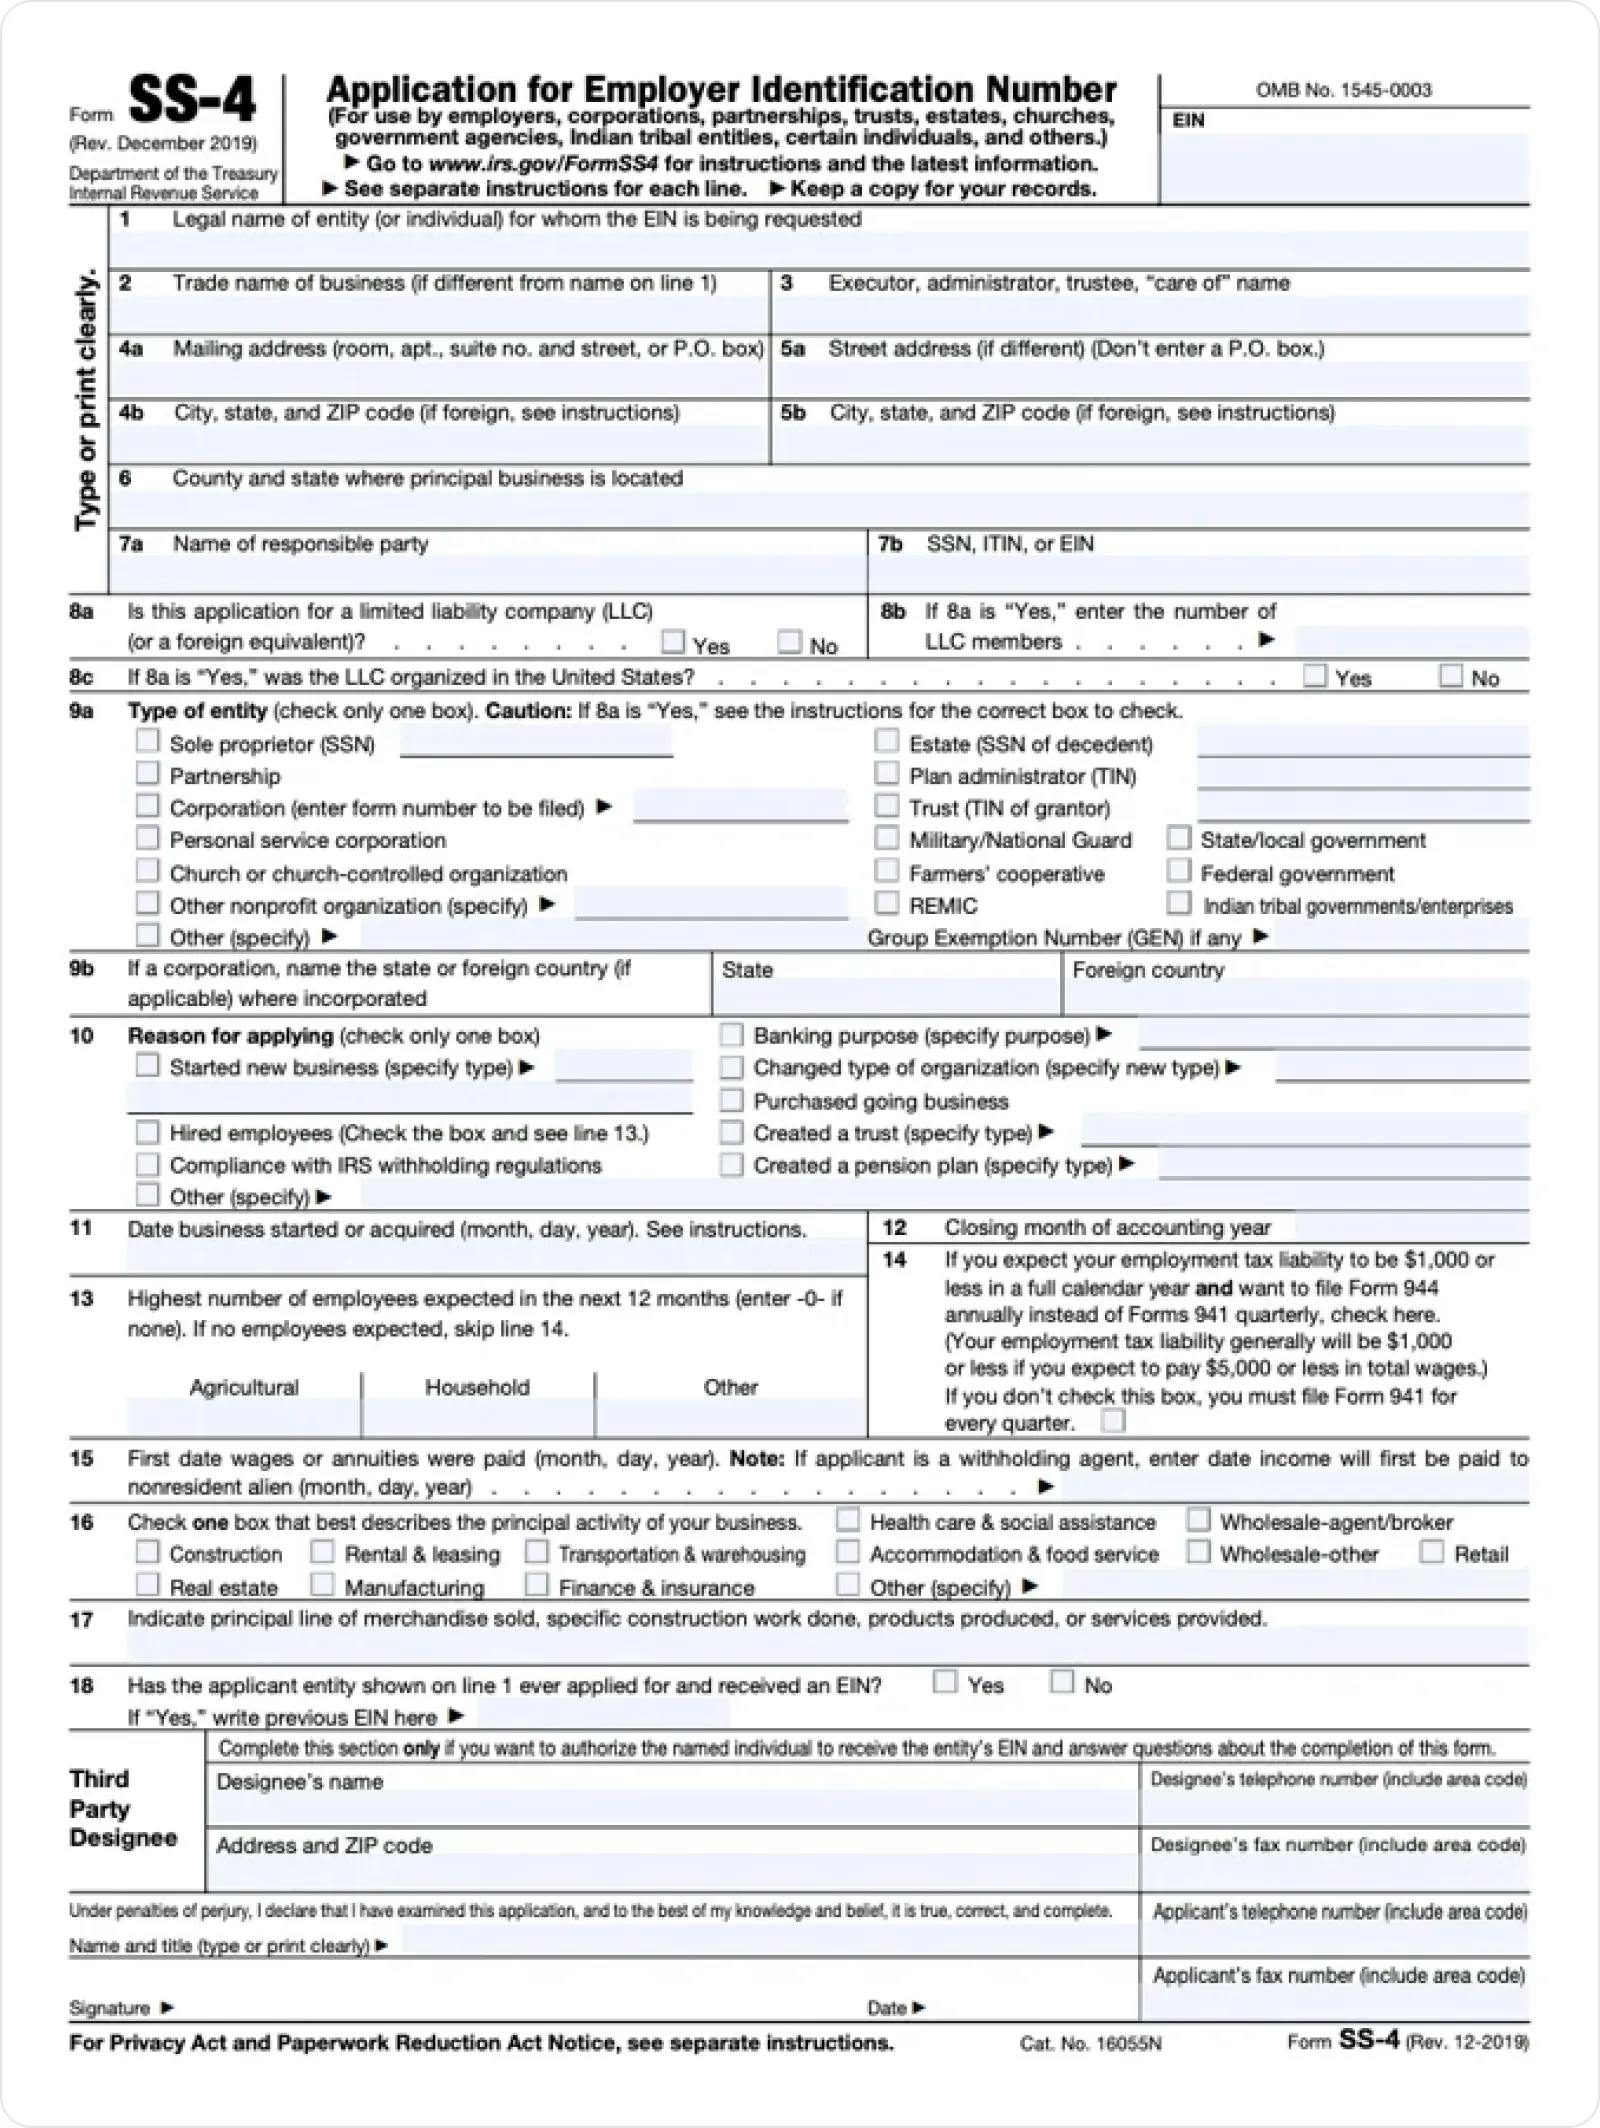 IRS SS-4 Form